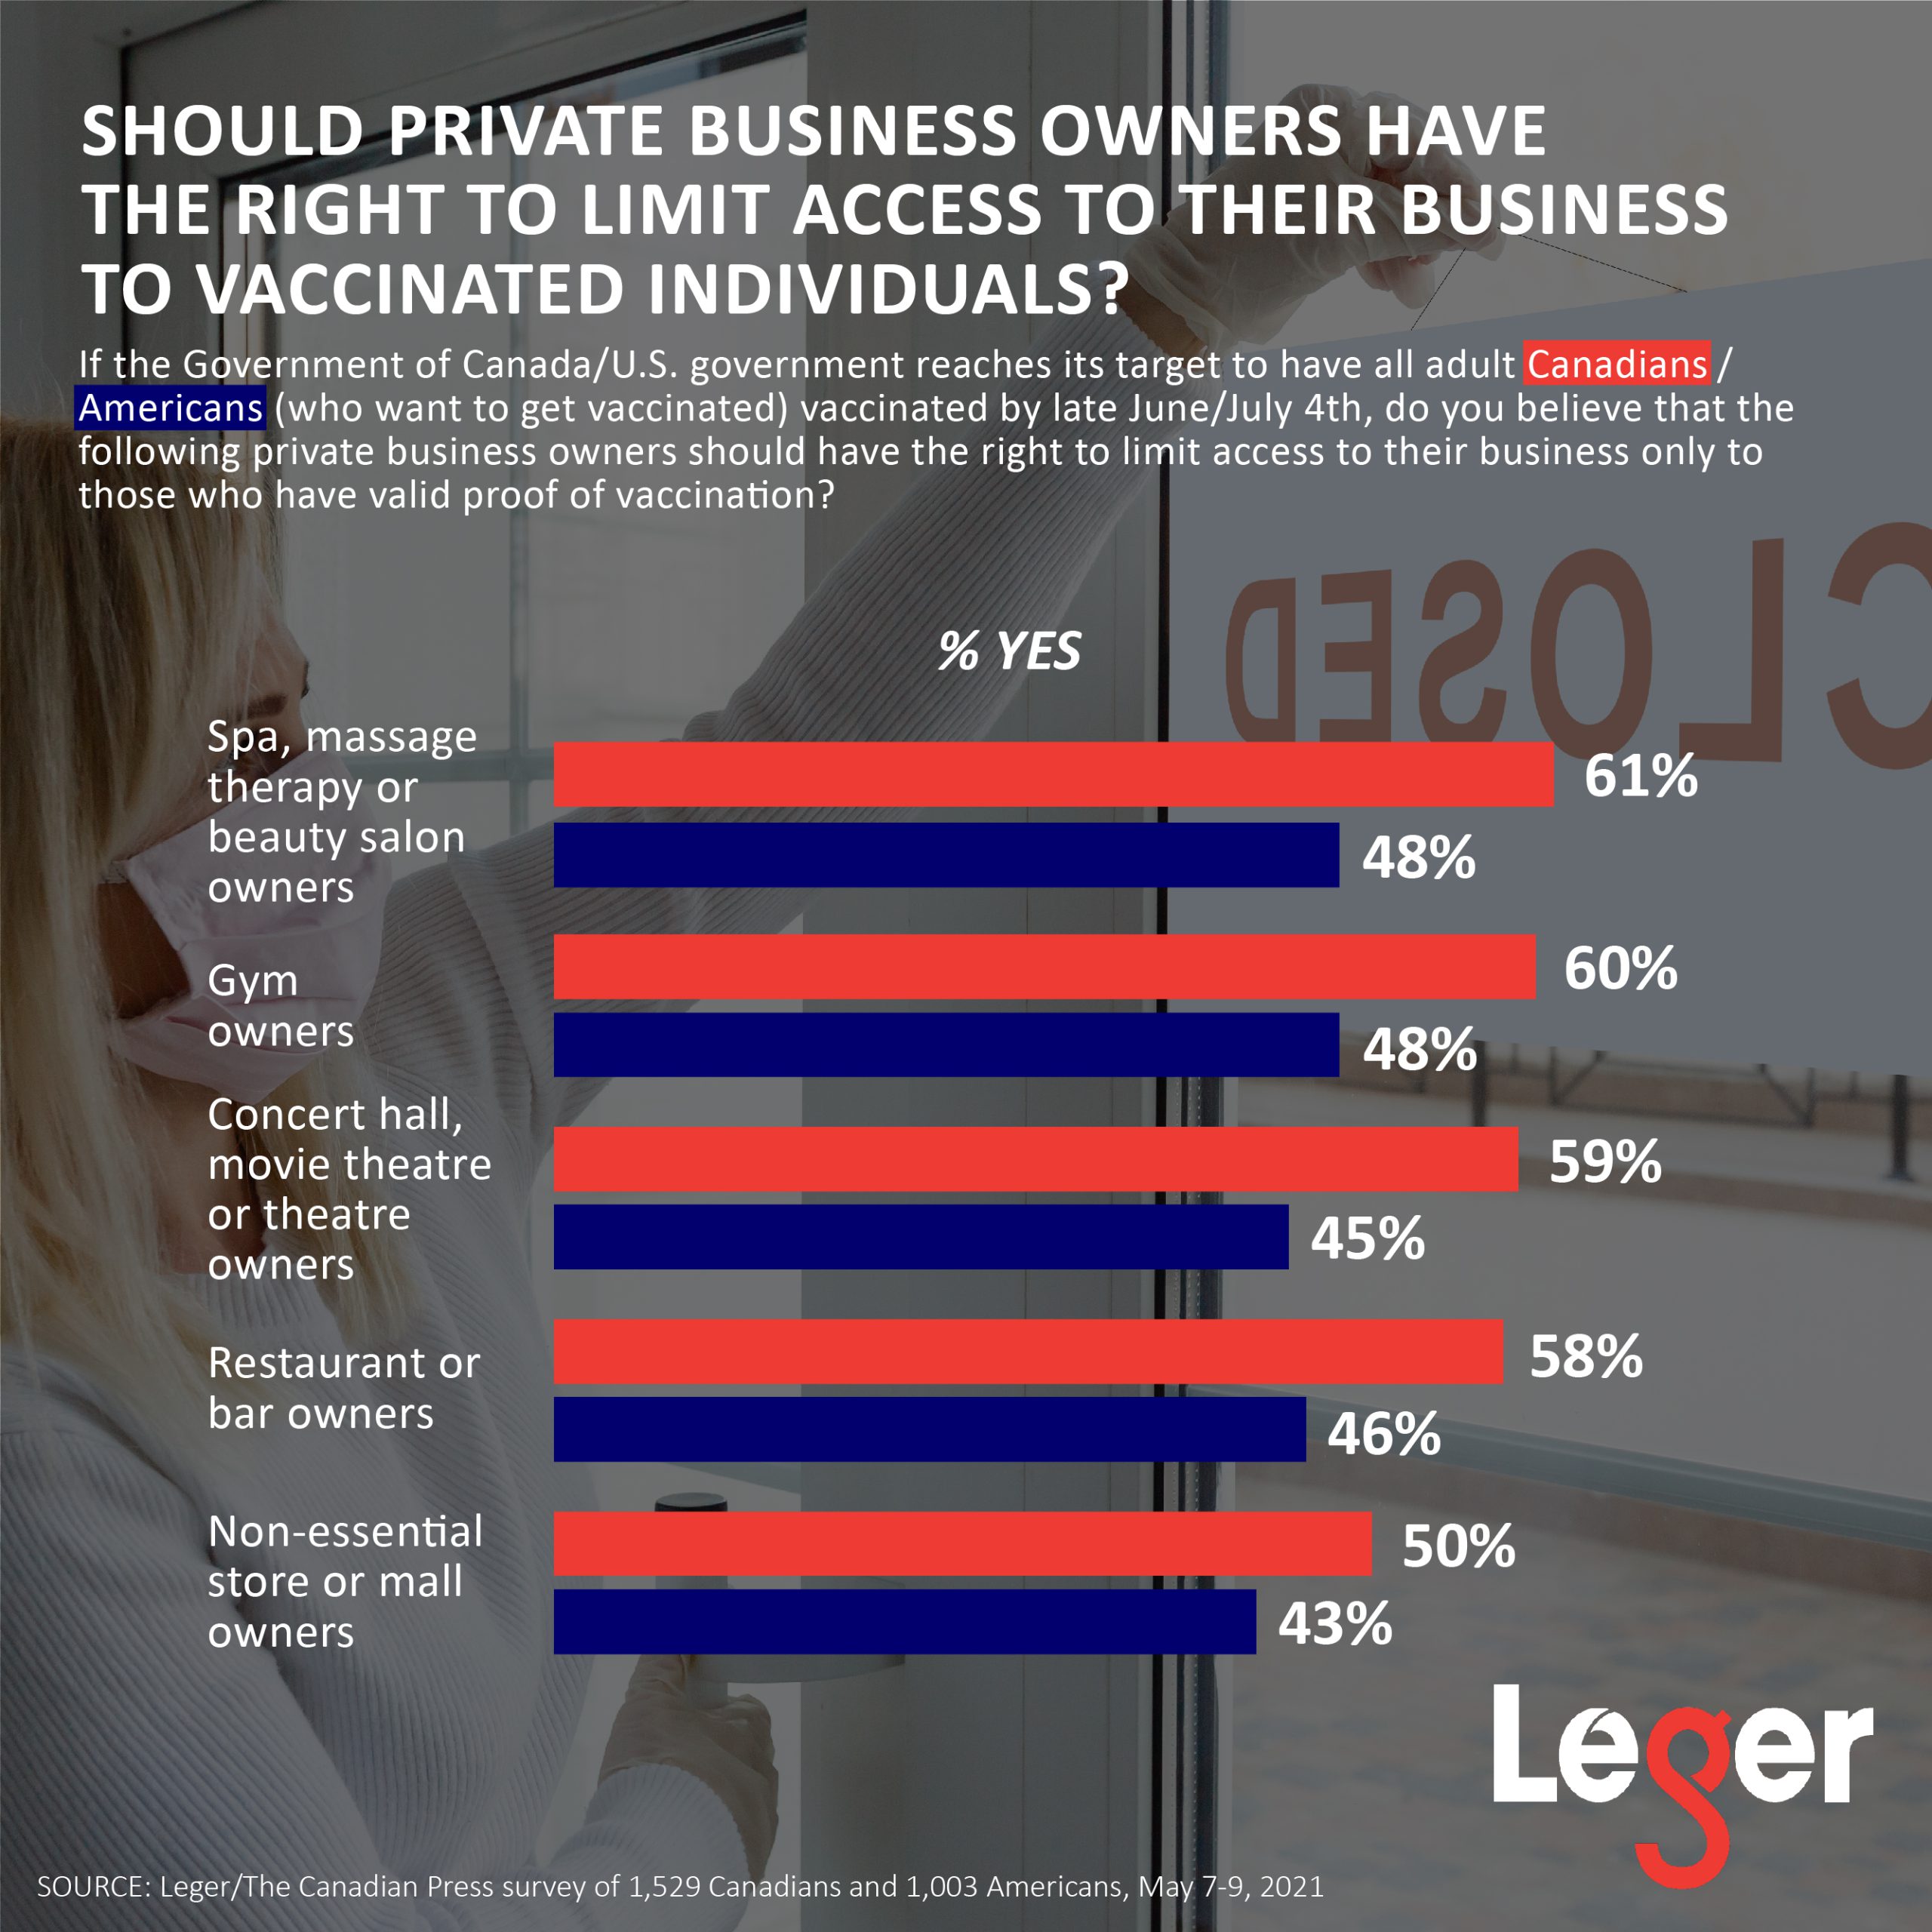 Should private business owners have the right to limit access to their business to vaccinated individuals?